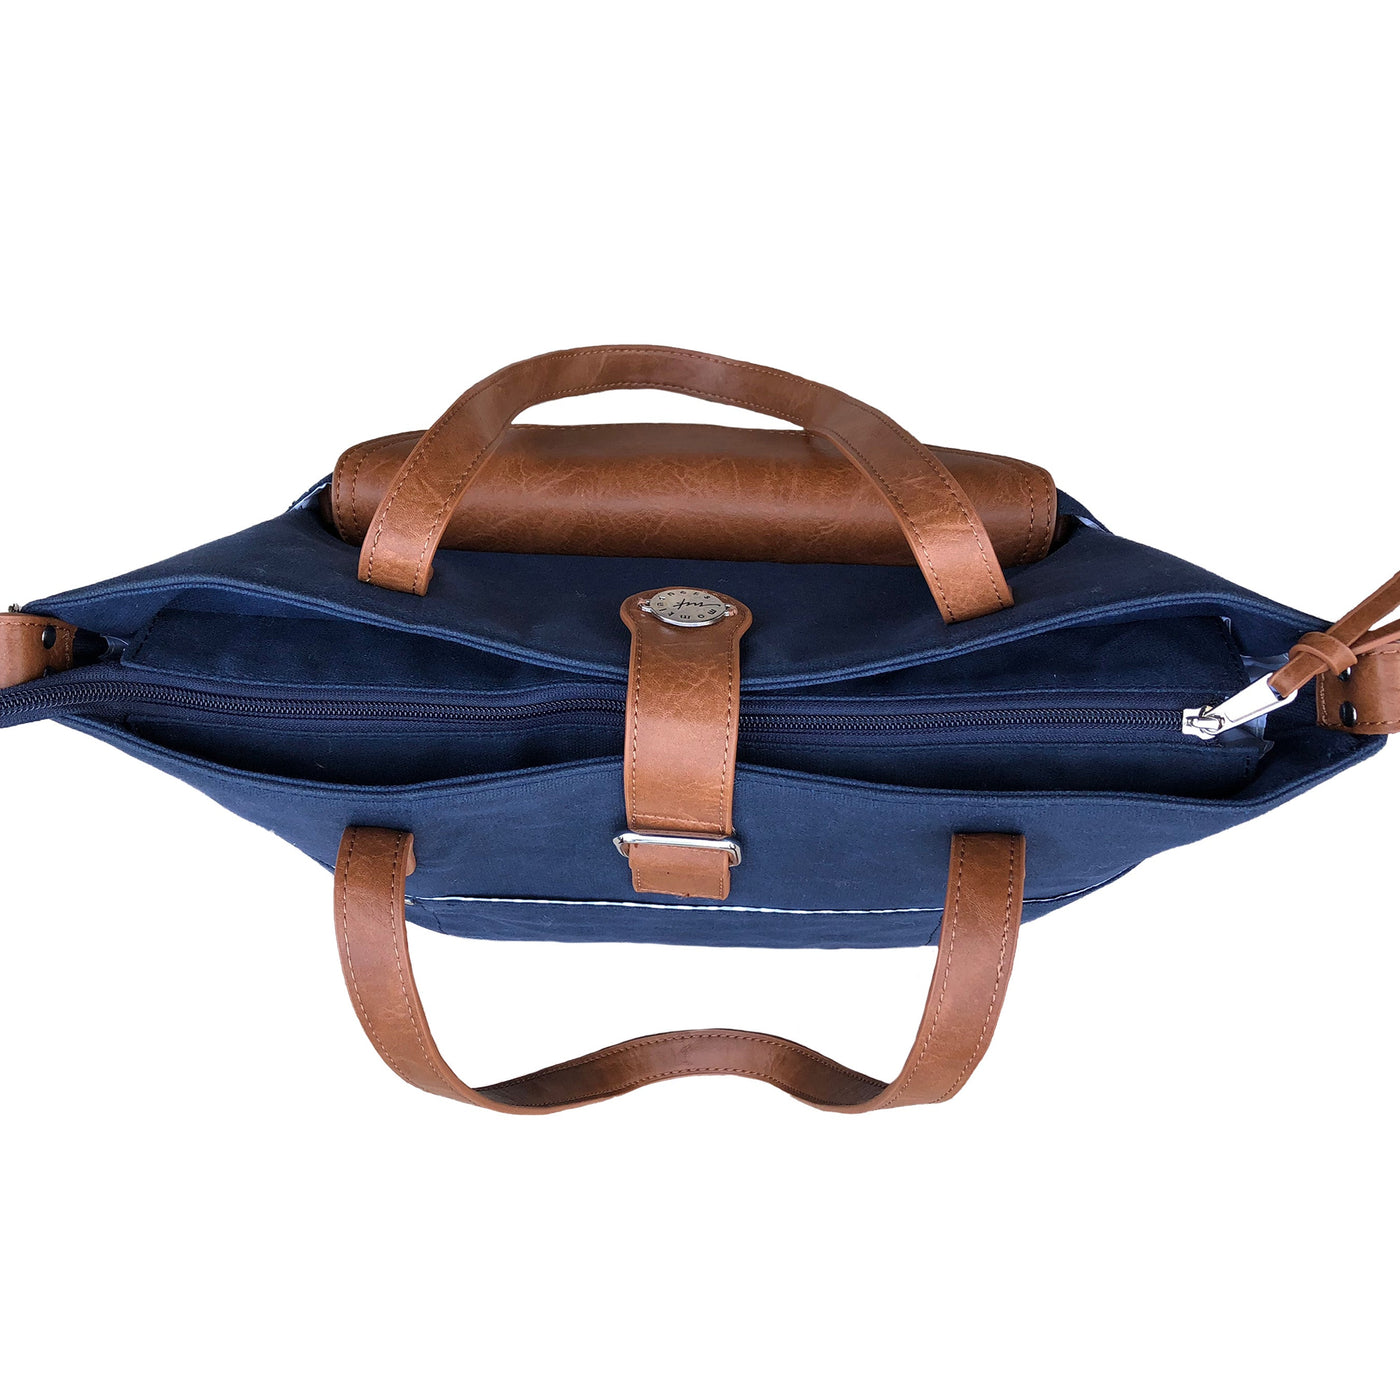 Top down view of navy blue waxed canvas tote with zipper & magnetic snap  closed across the top.